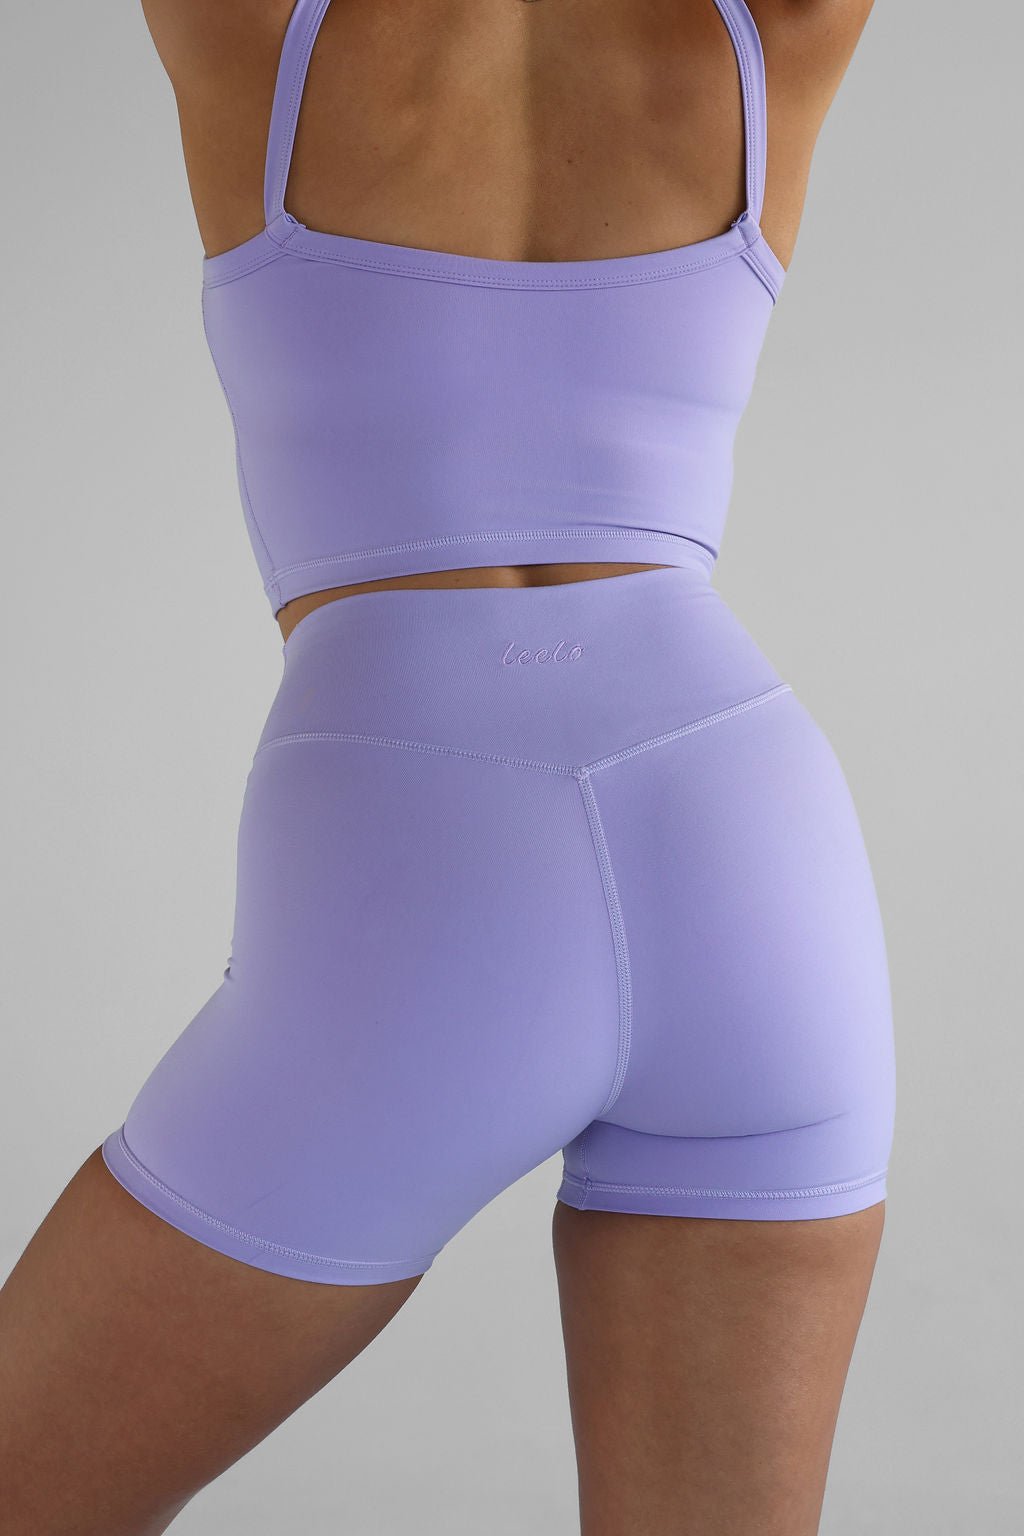 5" Signature Bike Shorts - Lilac SHIPPING FROM 12/02 - LEELO ACTIVE